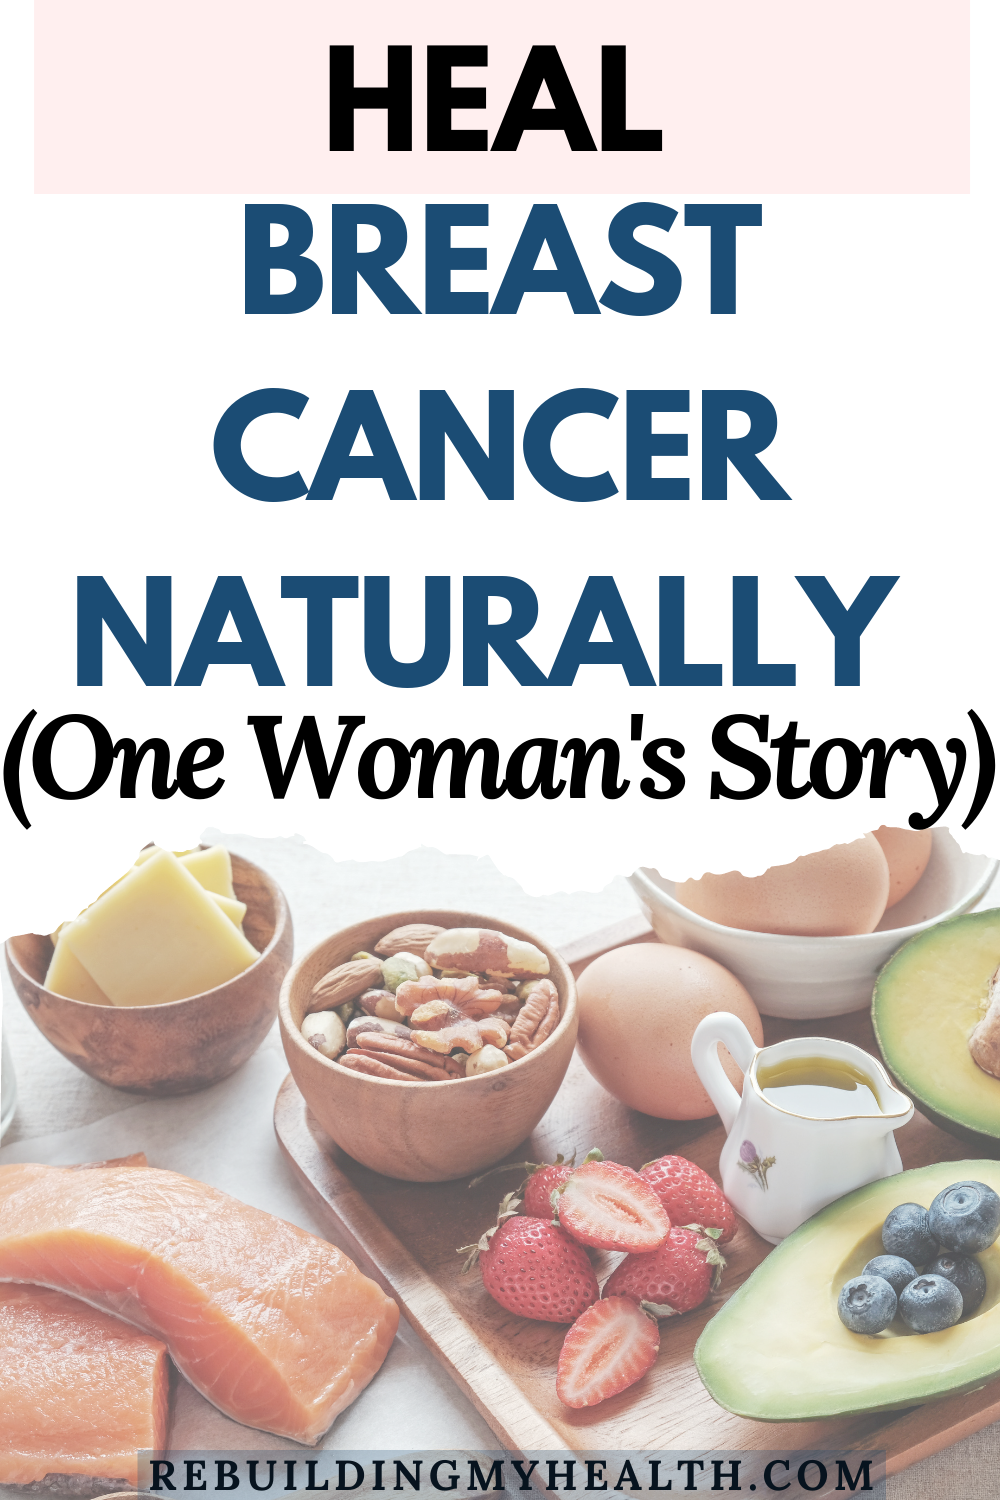 Learn how a Florida woman healed her breast cancer naturally with a keto diet, detox and other steps to bring her body back into balance.